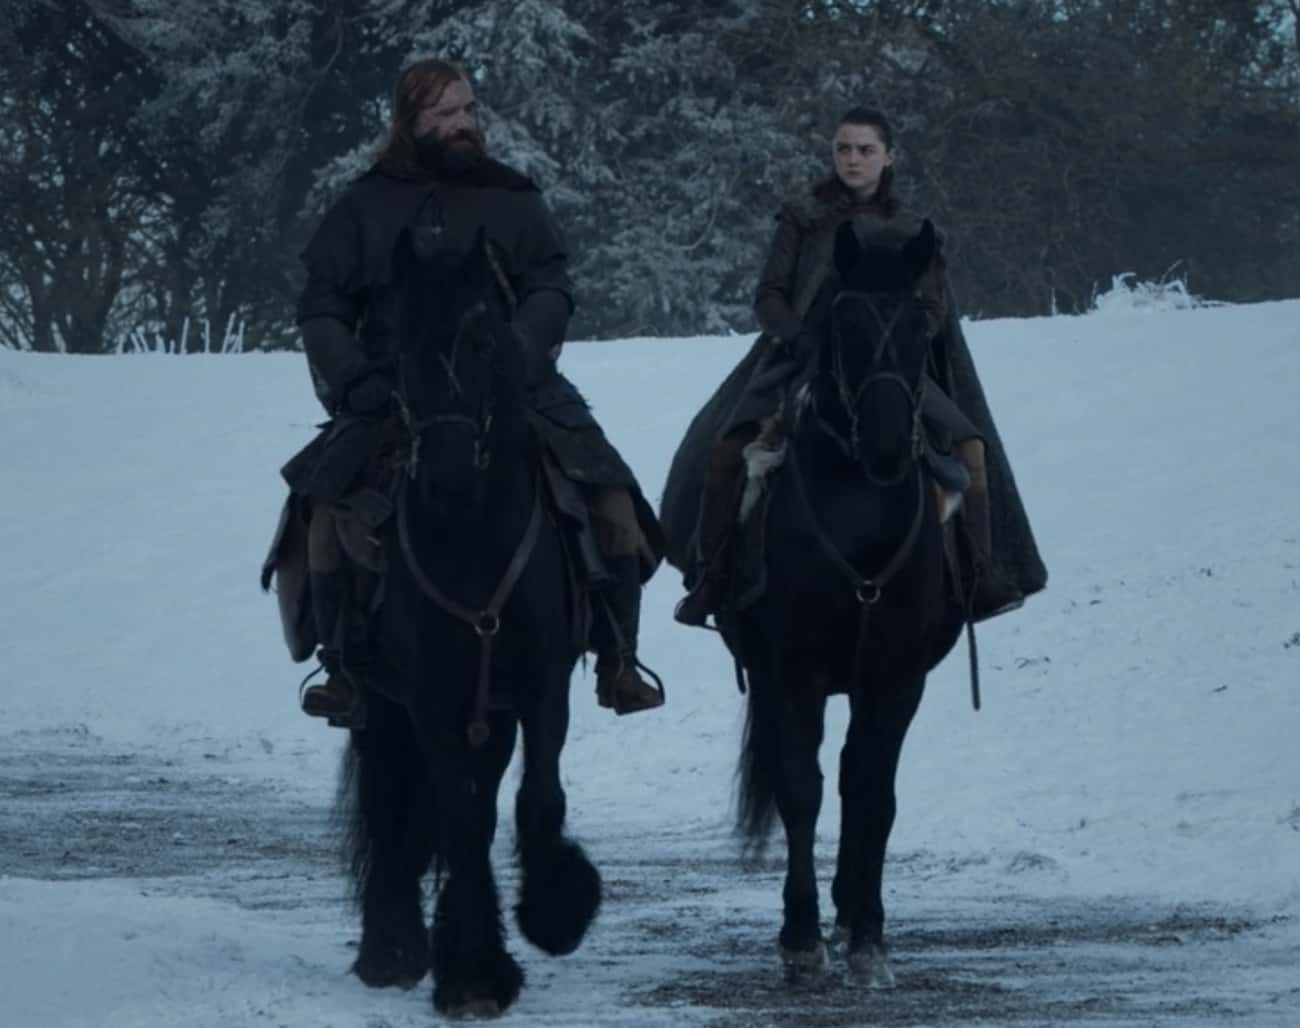 Arya And The Hound Leave For King's Landing